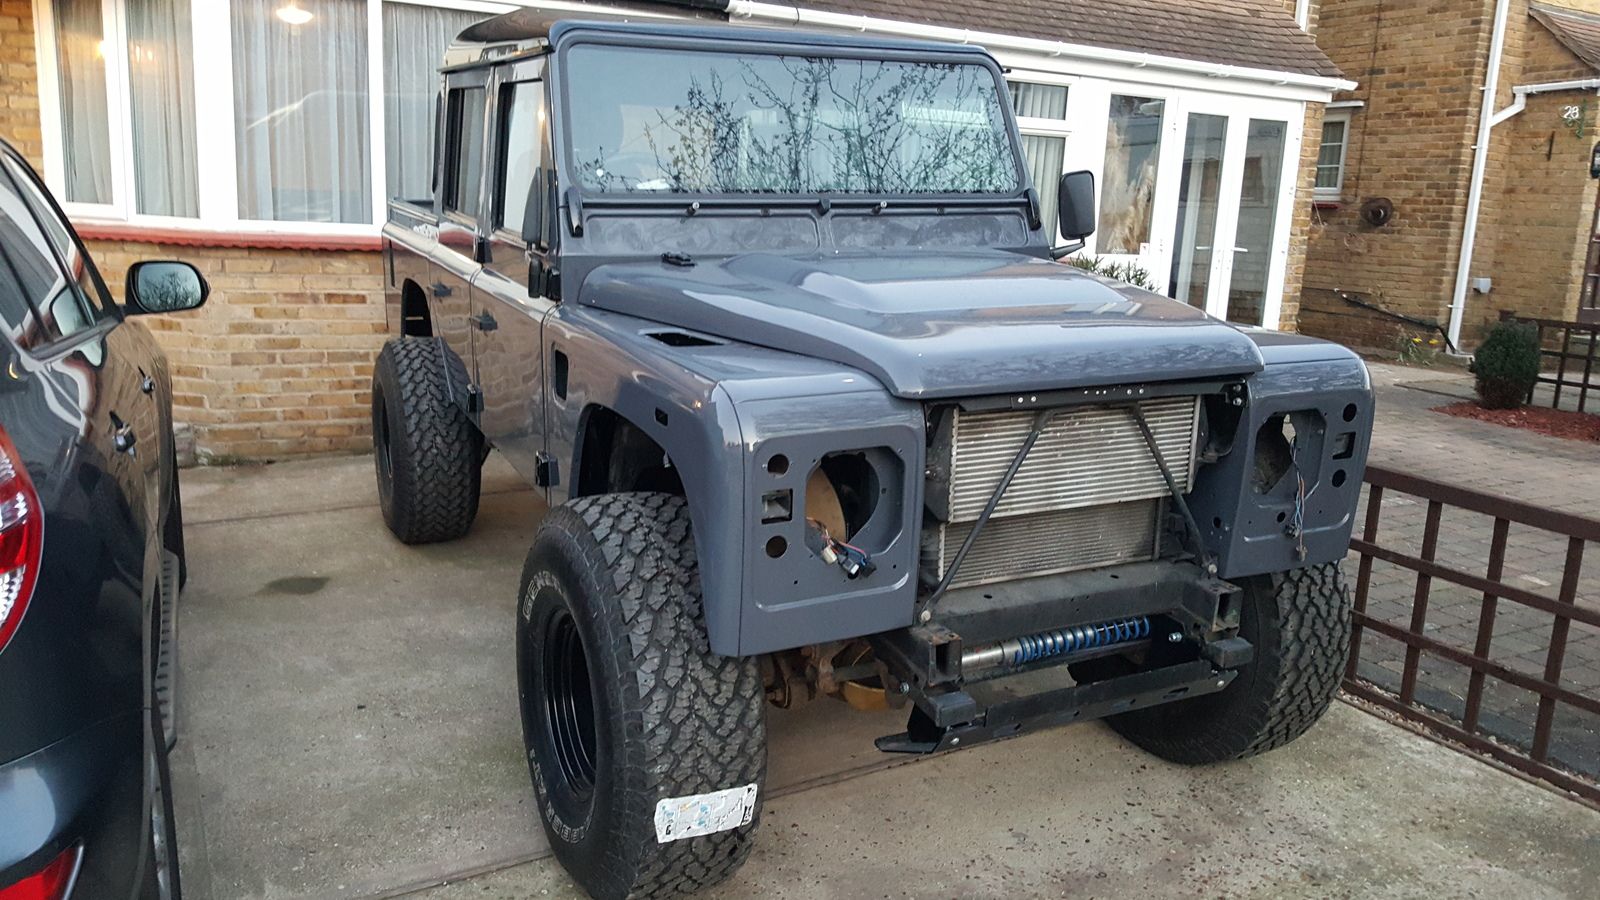 my 110 puma project | Page 3 | LandyZone - Land Rover Forum